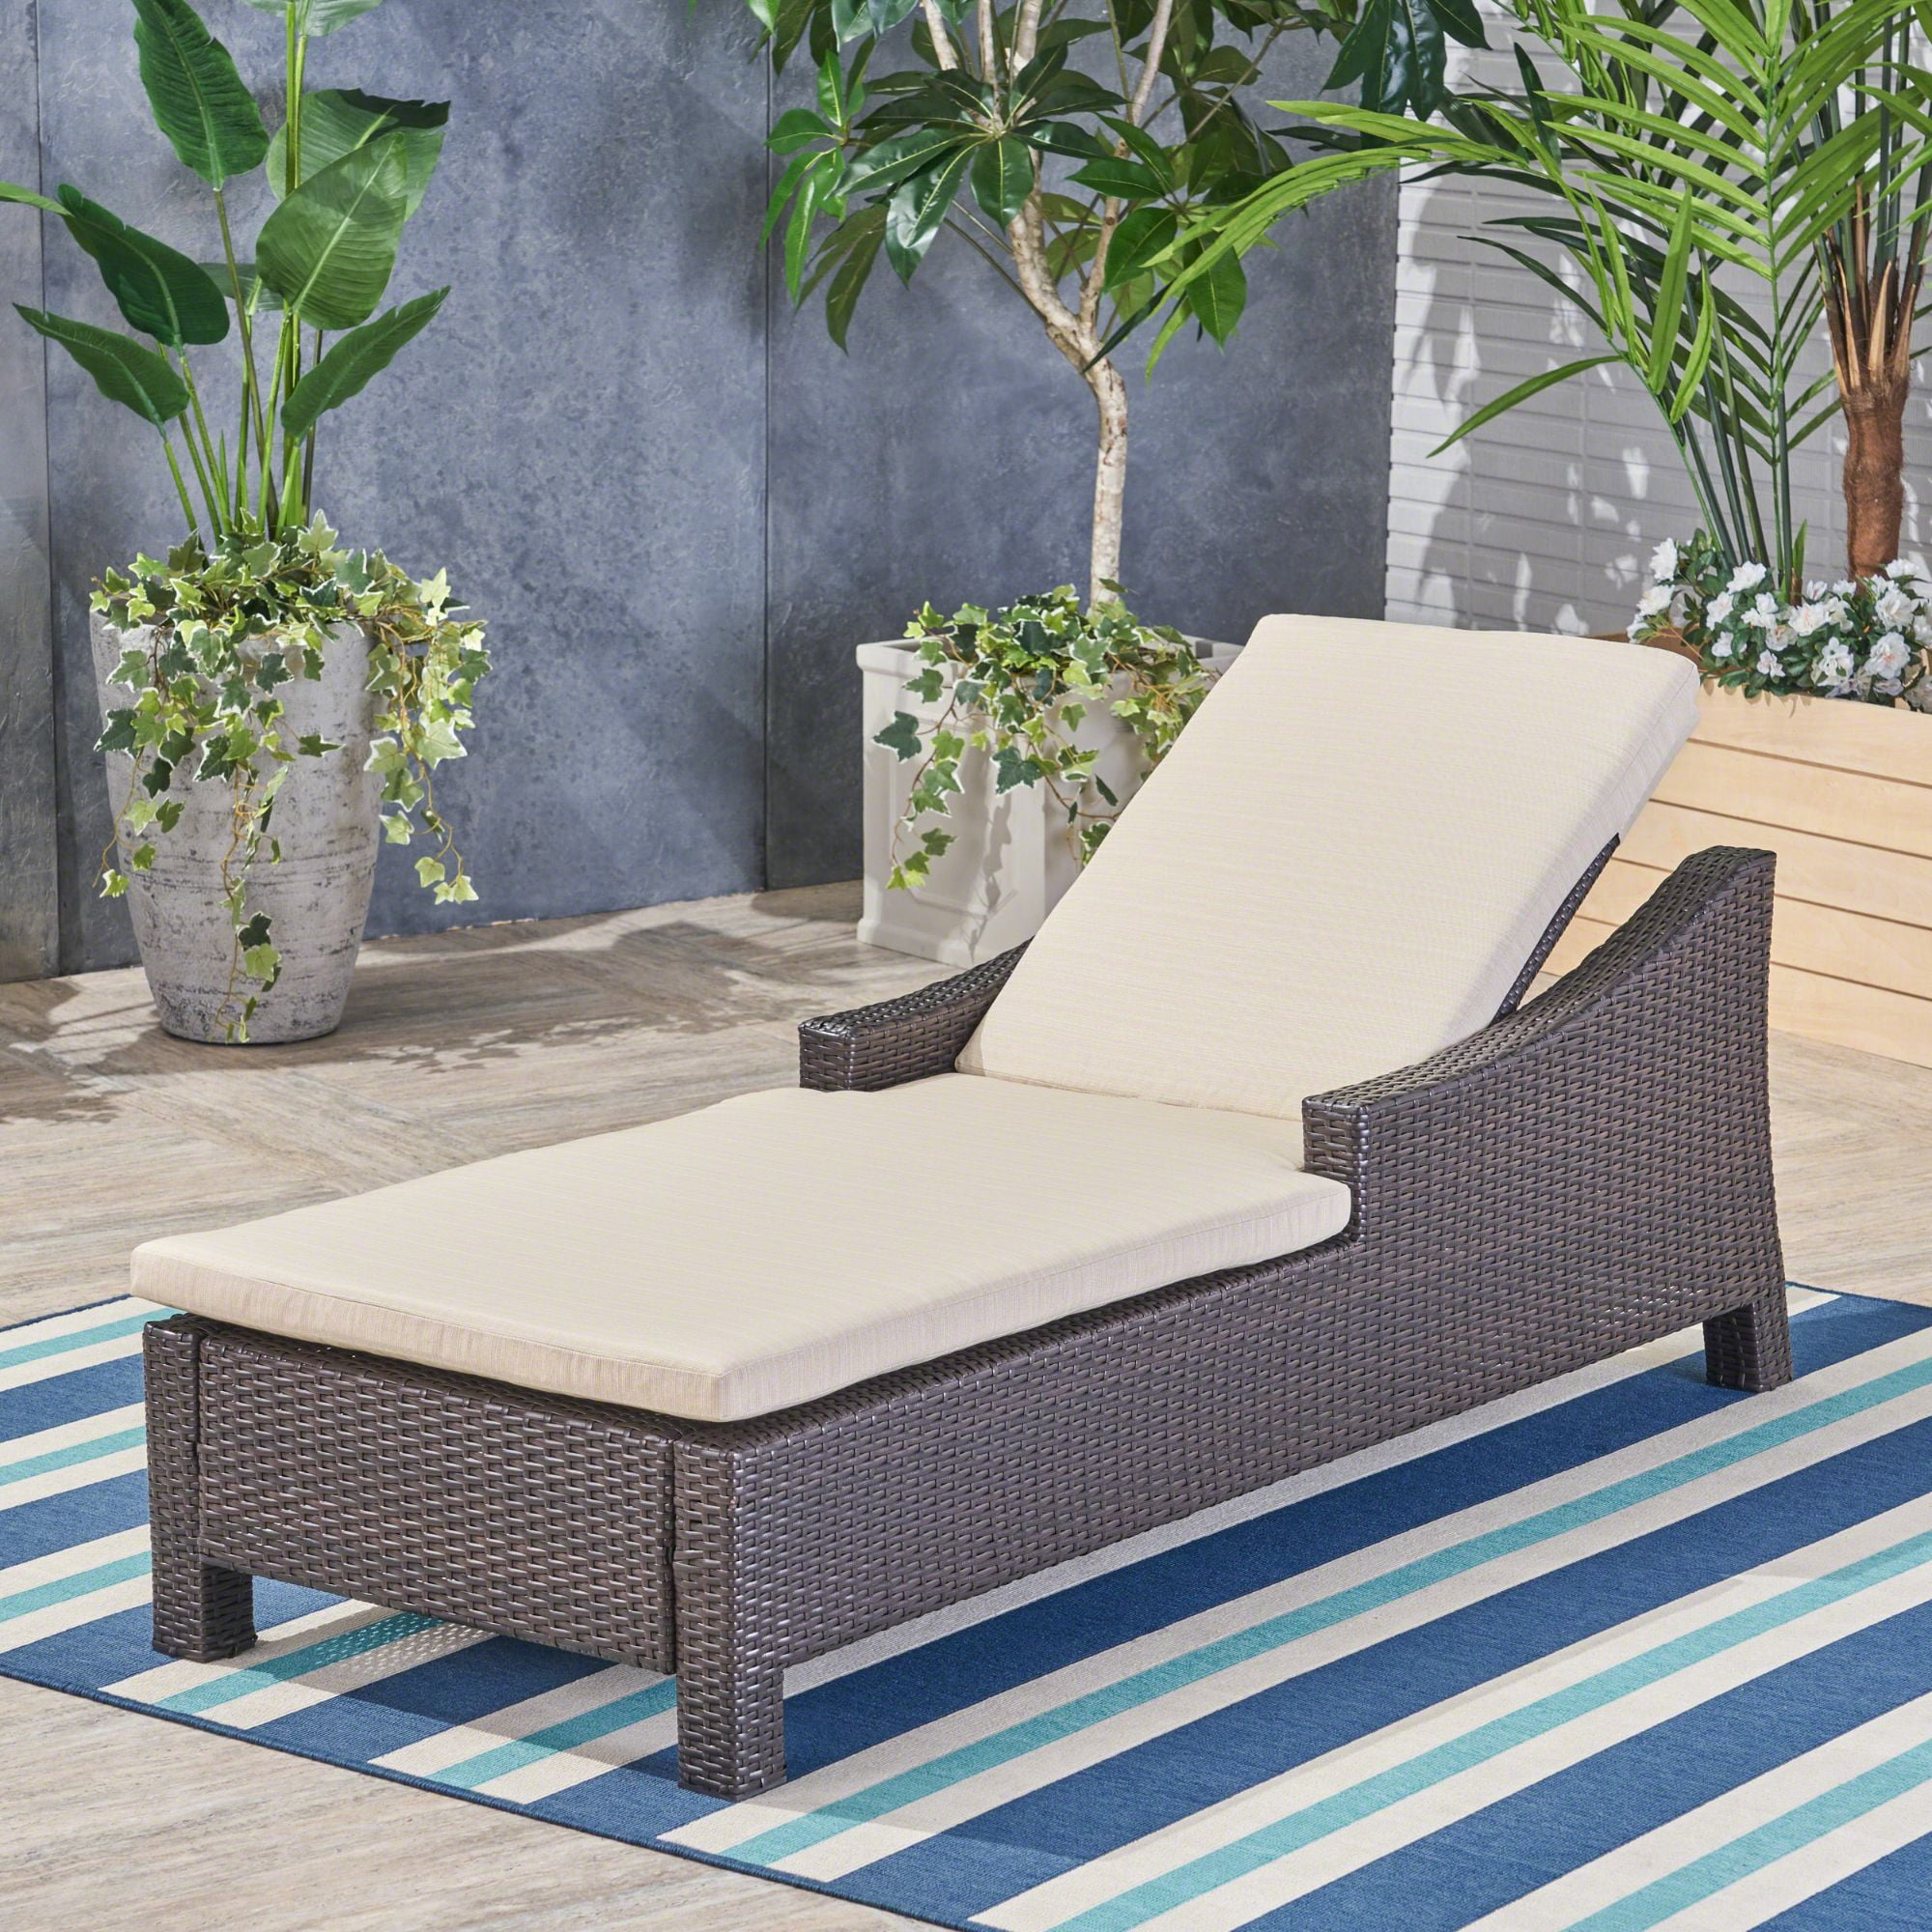 Simple Lounge Chair Outdoor Walmart for Simple Design